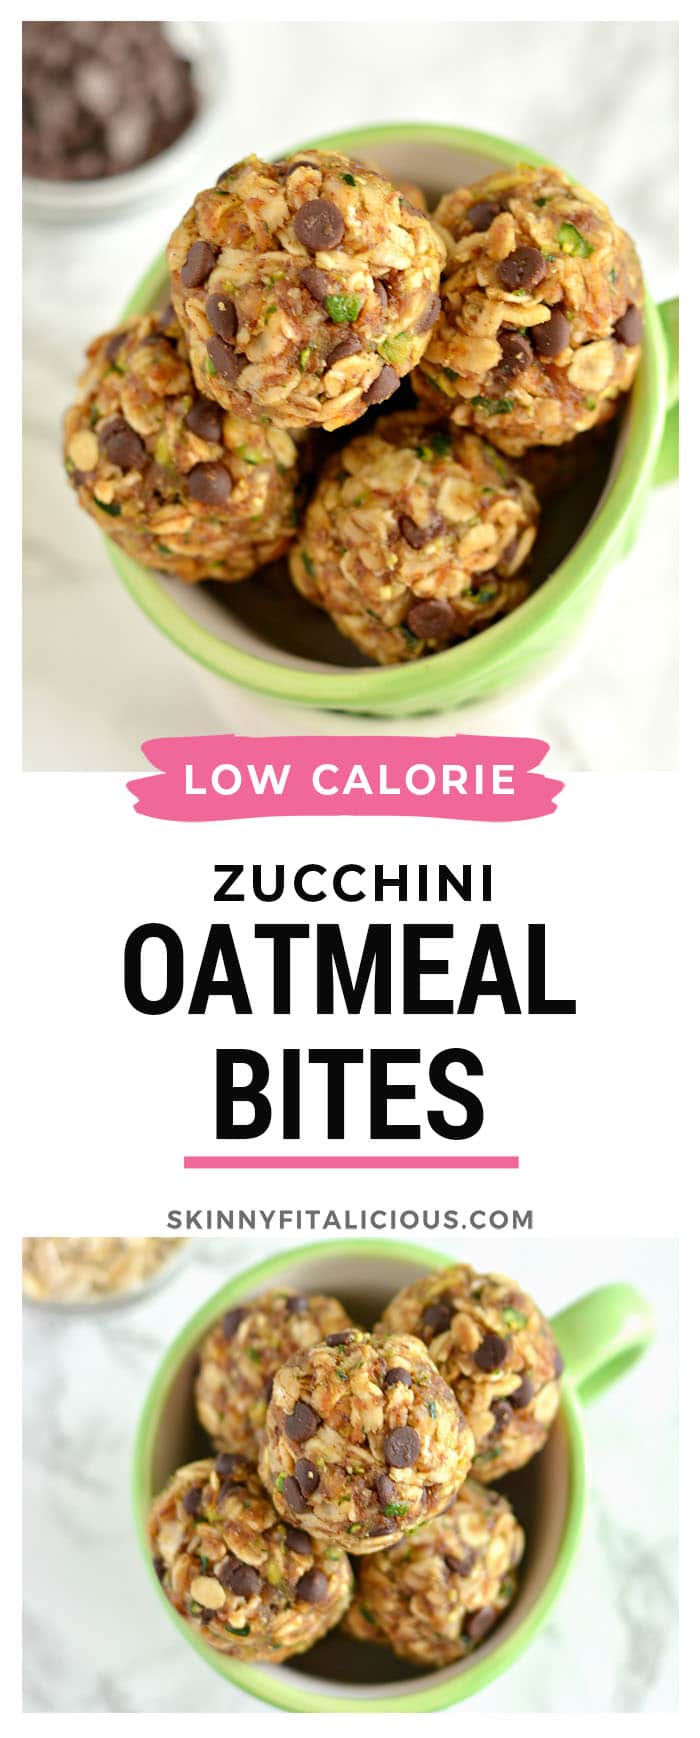 Zucchini Chocolate Oatmeal Bites make a surprising homemade snack and only 100 calories! Made with shredded zucchini, oats and nut butter, these no-bake gluten free, low calorie bites will soon be your new easy go-to summer snack!